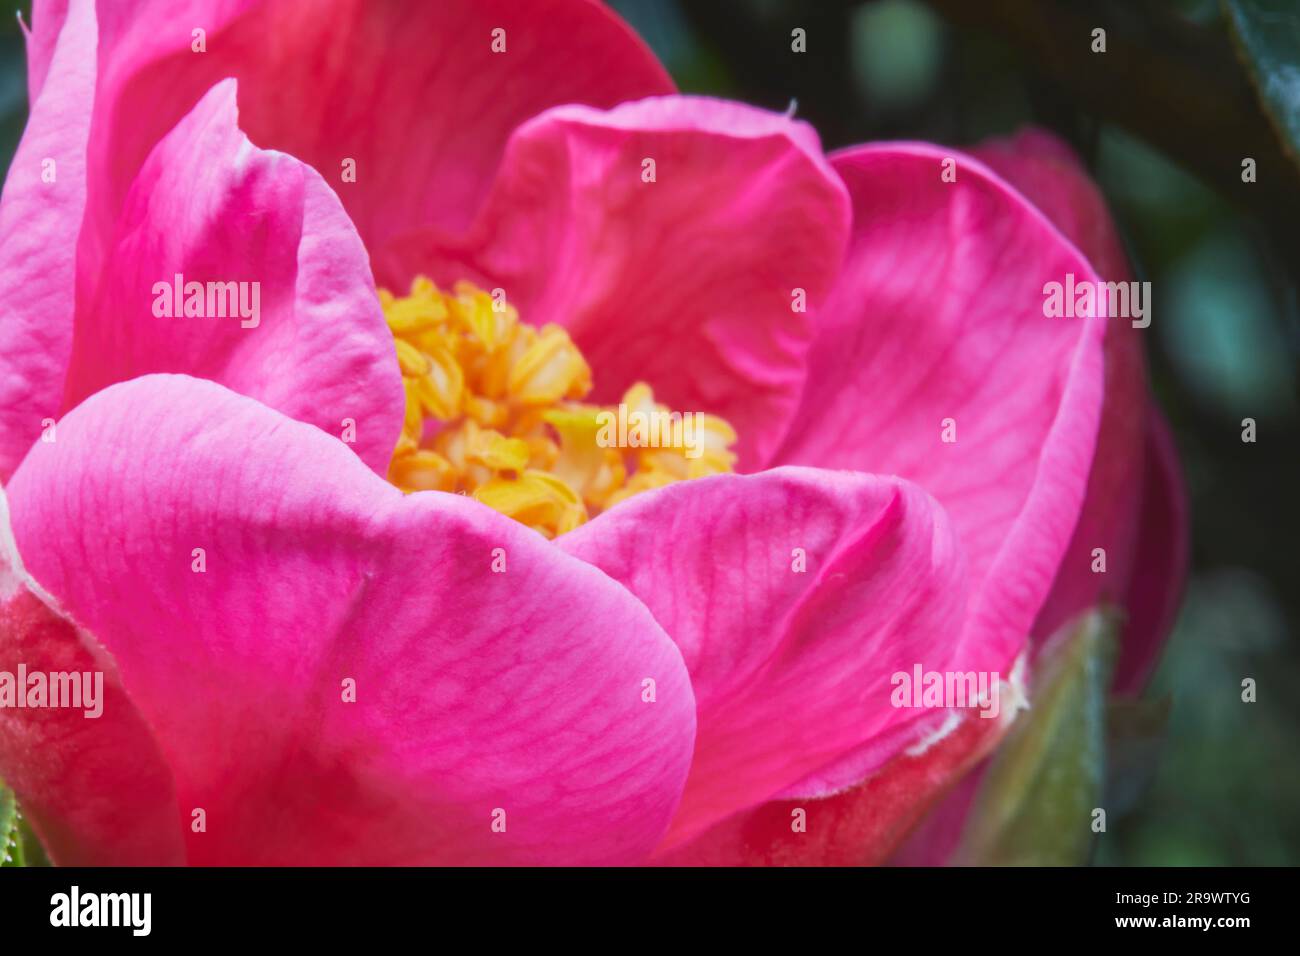 A Camellia flower in full bloom in winter or early spring. Stock Photo